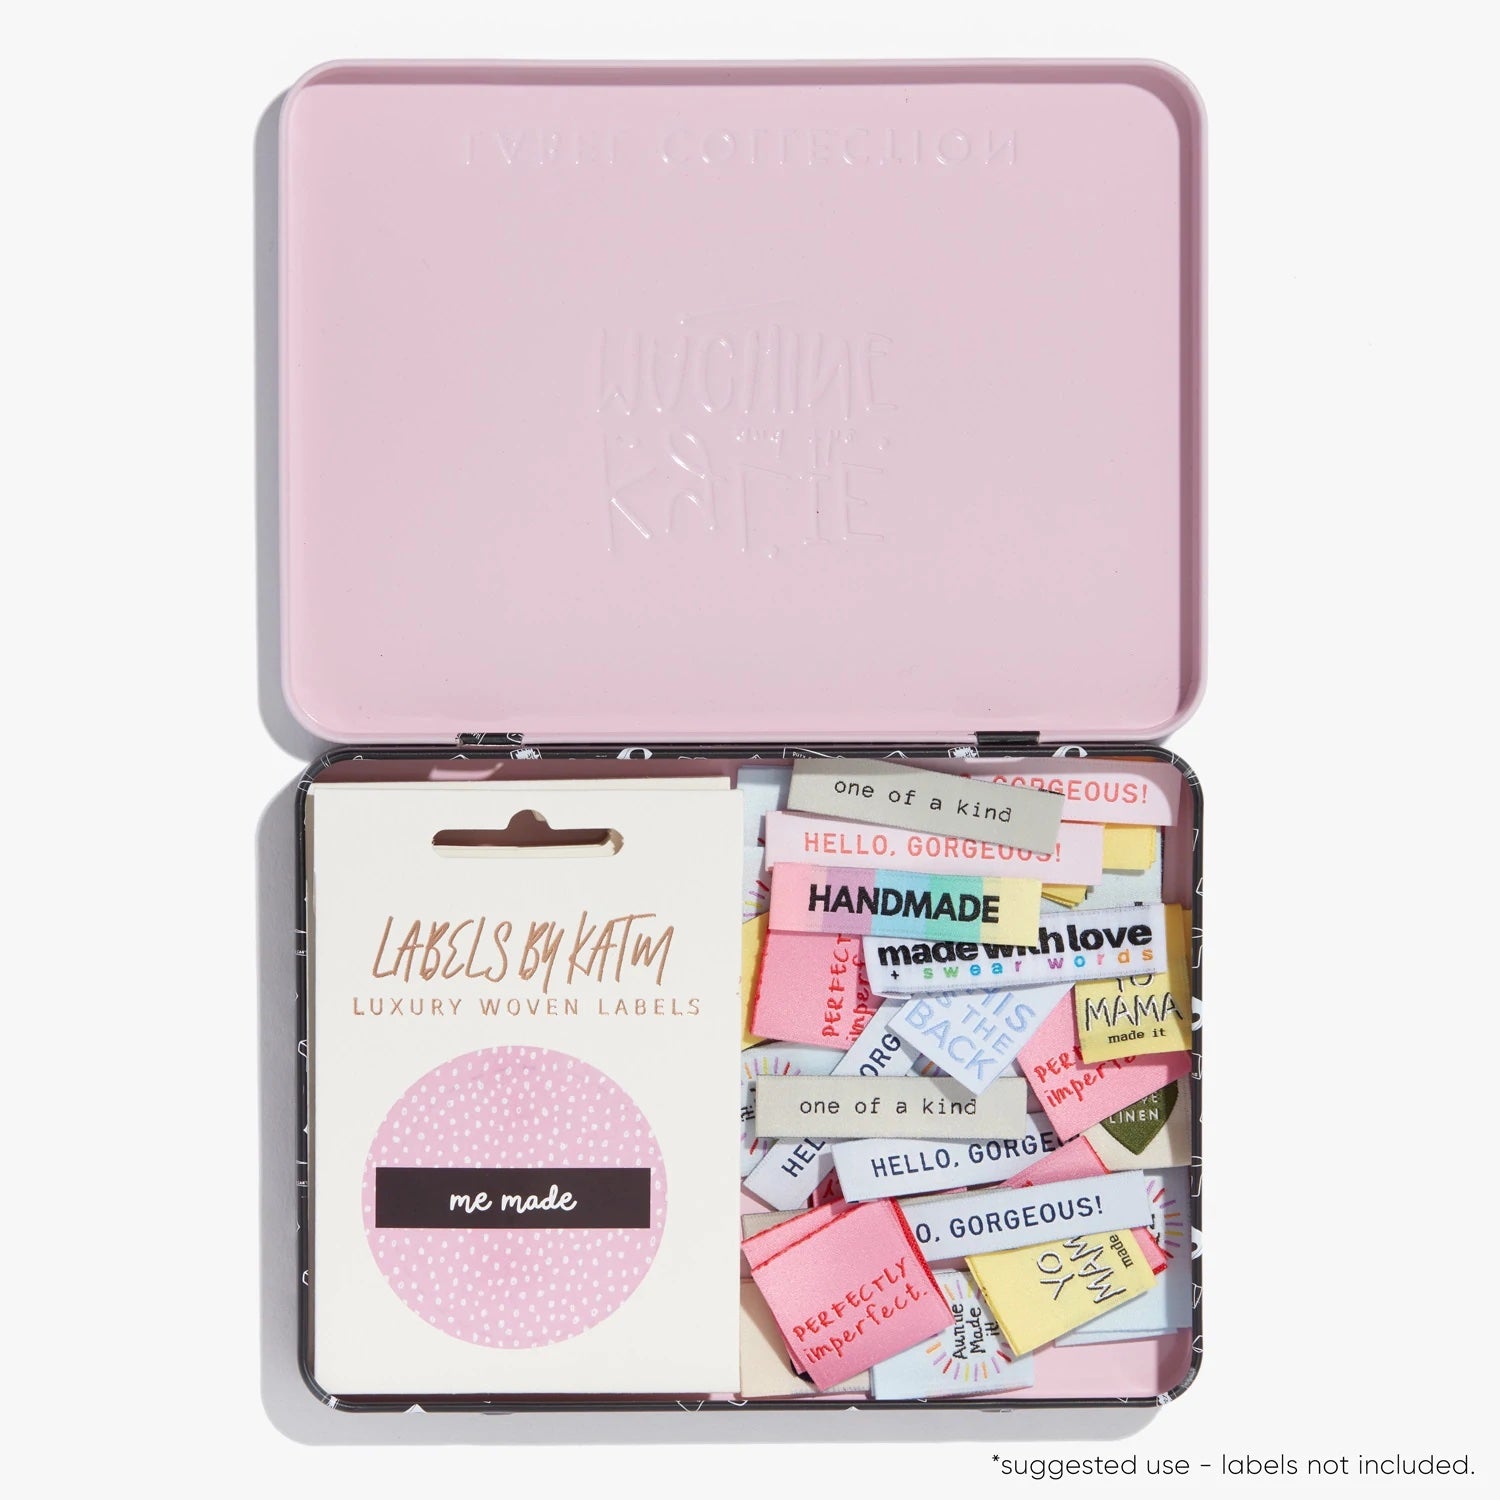 Photo showing the Label Collector's Tin from Kylie & The Machine on The Fold Line. The tin holds approximately 10 packs of Kylie & The Machine labels in their cardboard pouches or hundreds of loose labels.